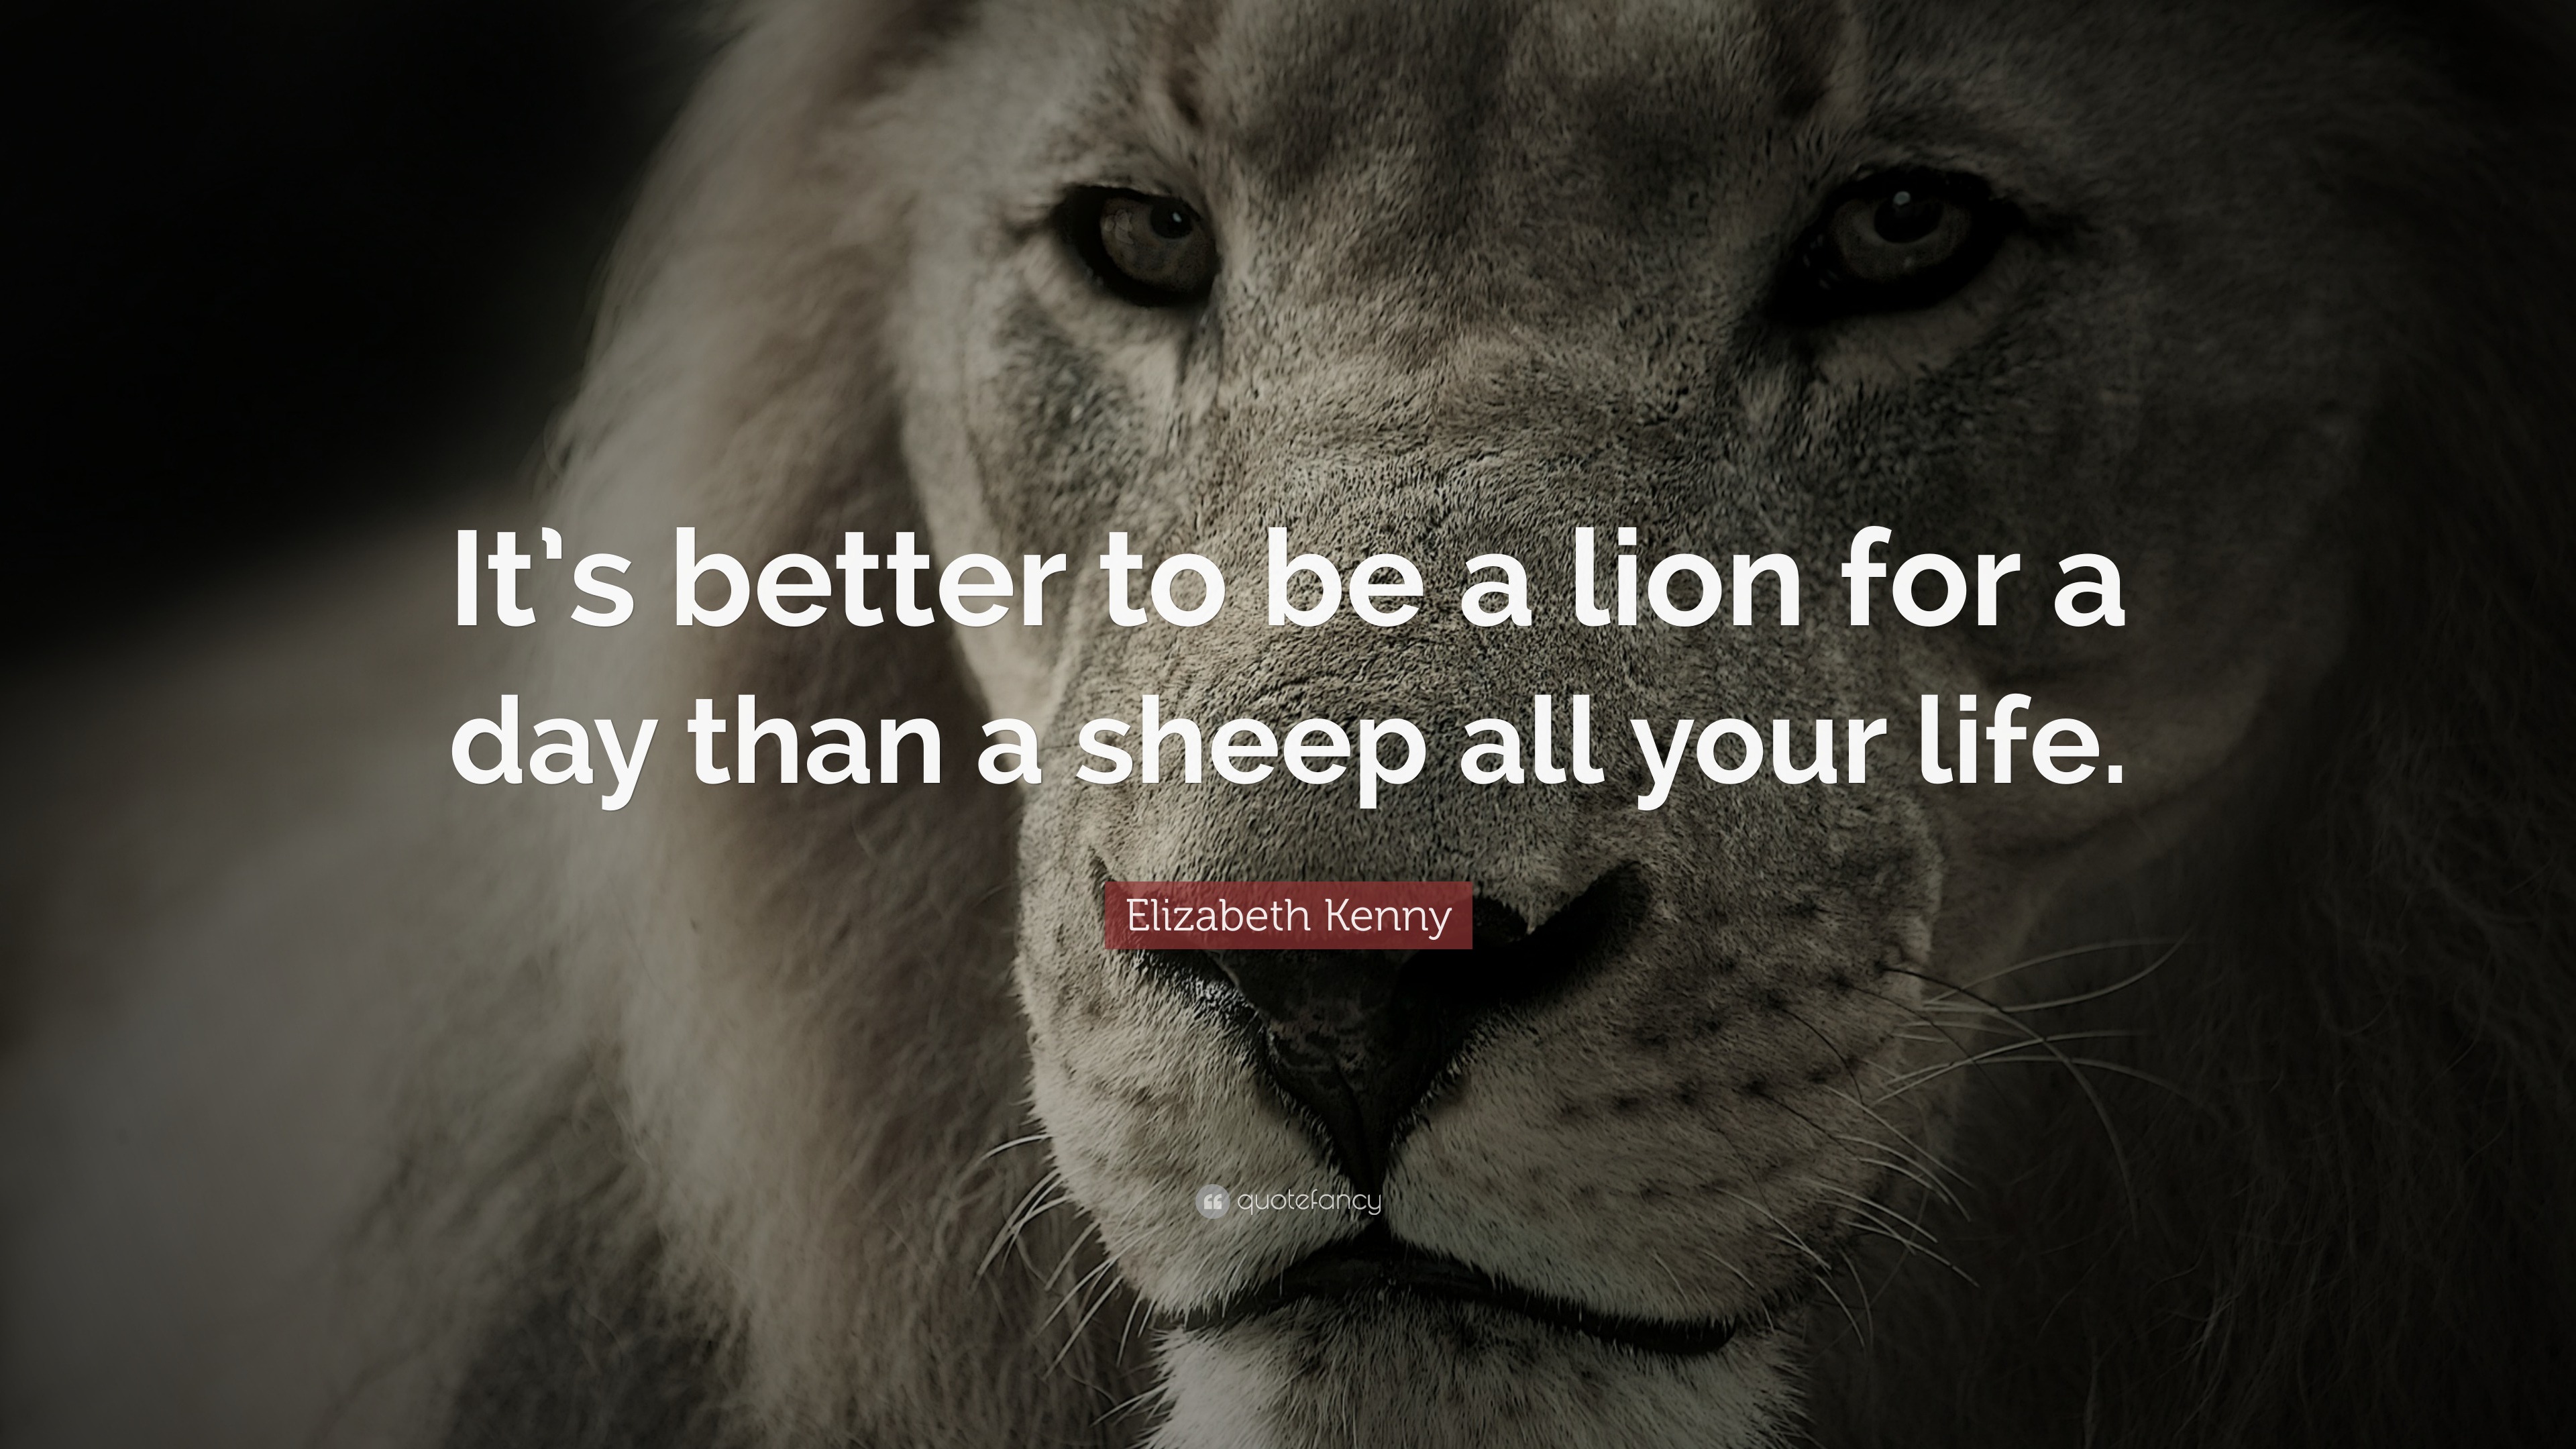 6361751 Elizabeth Kenny Quote It s better to be a lion for a day than a